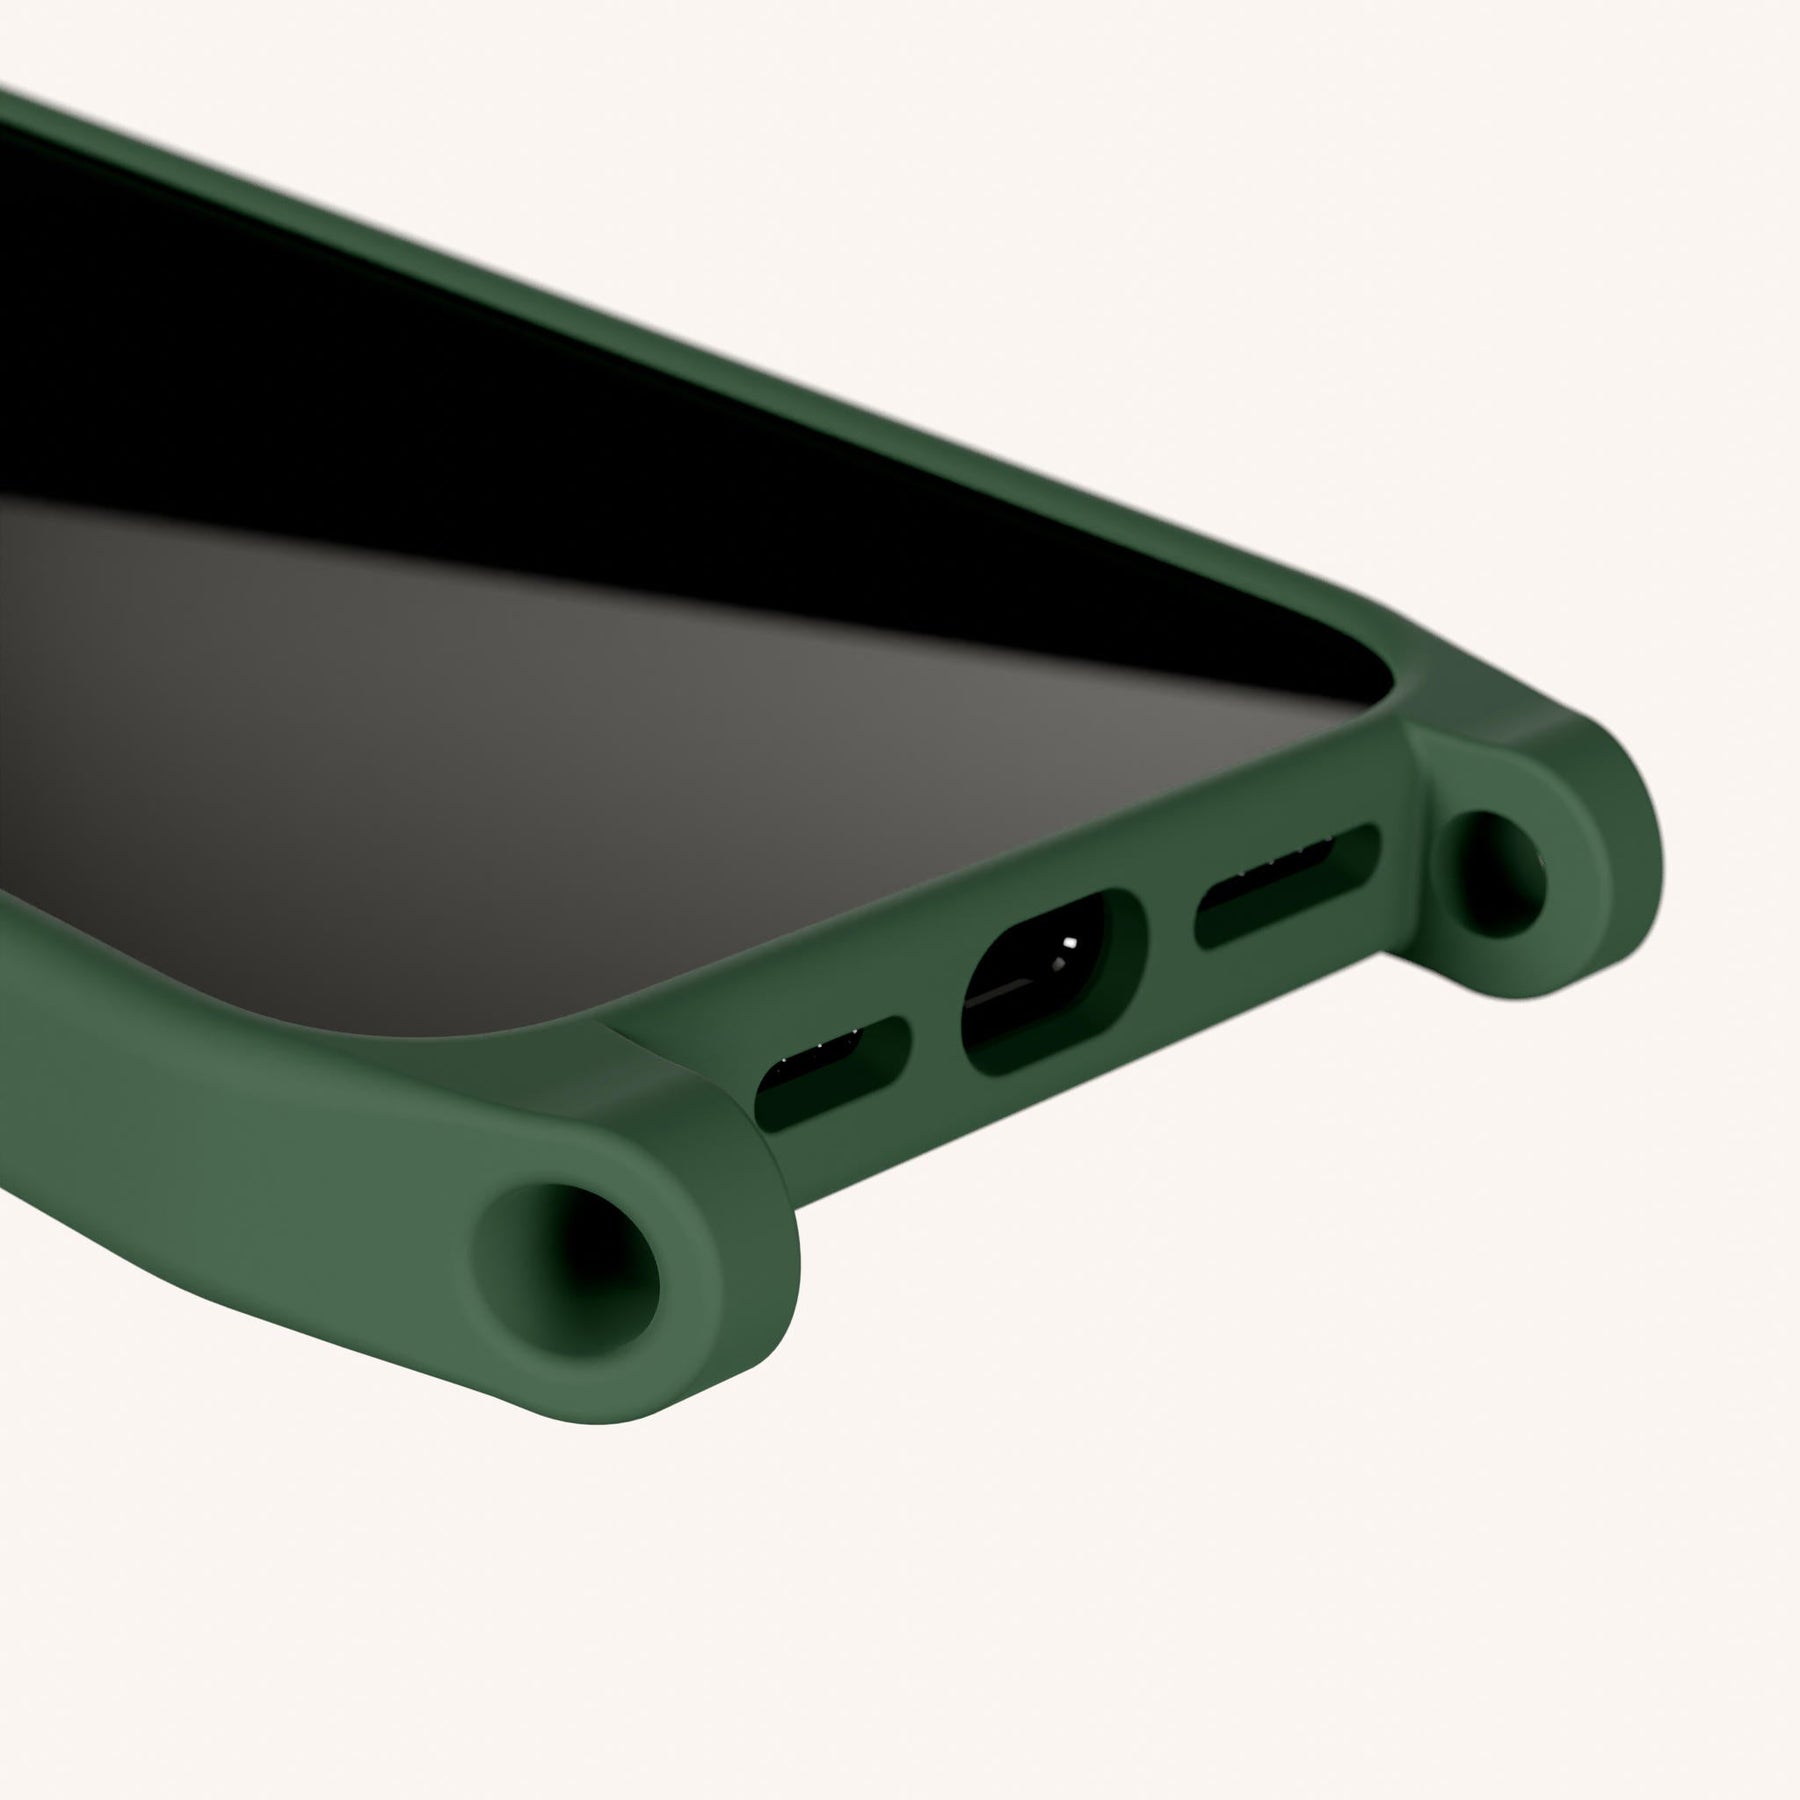 Phone Case with Eyelets in sage